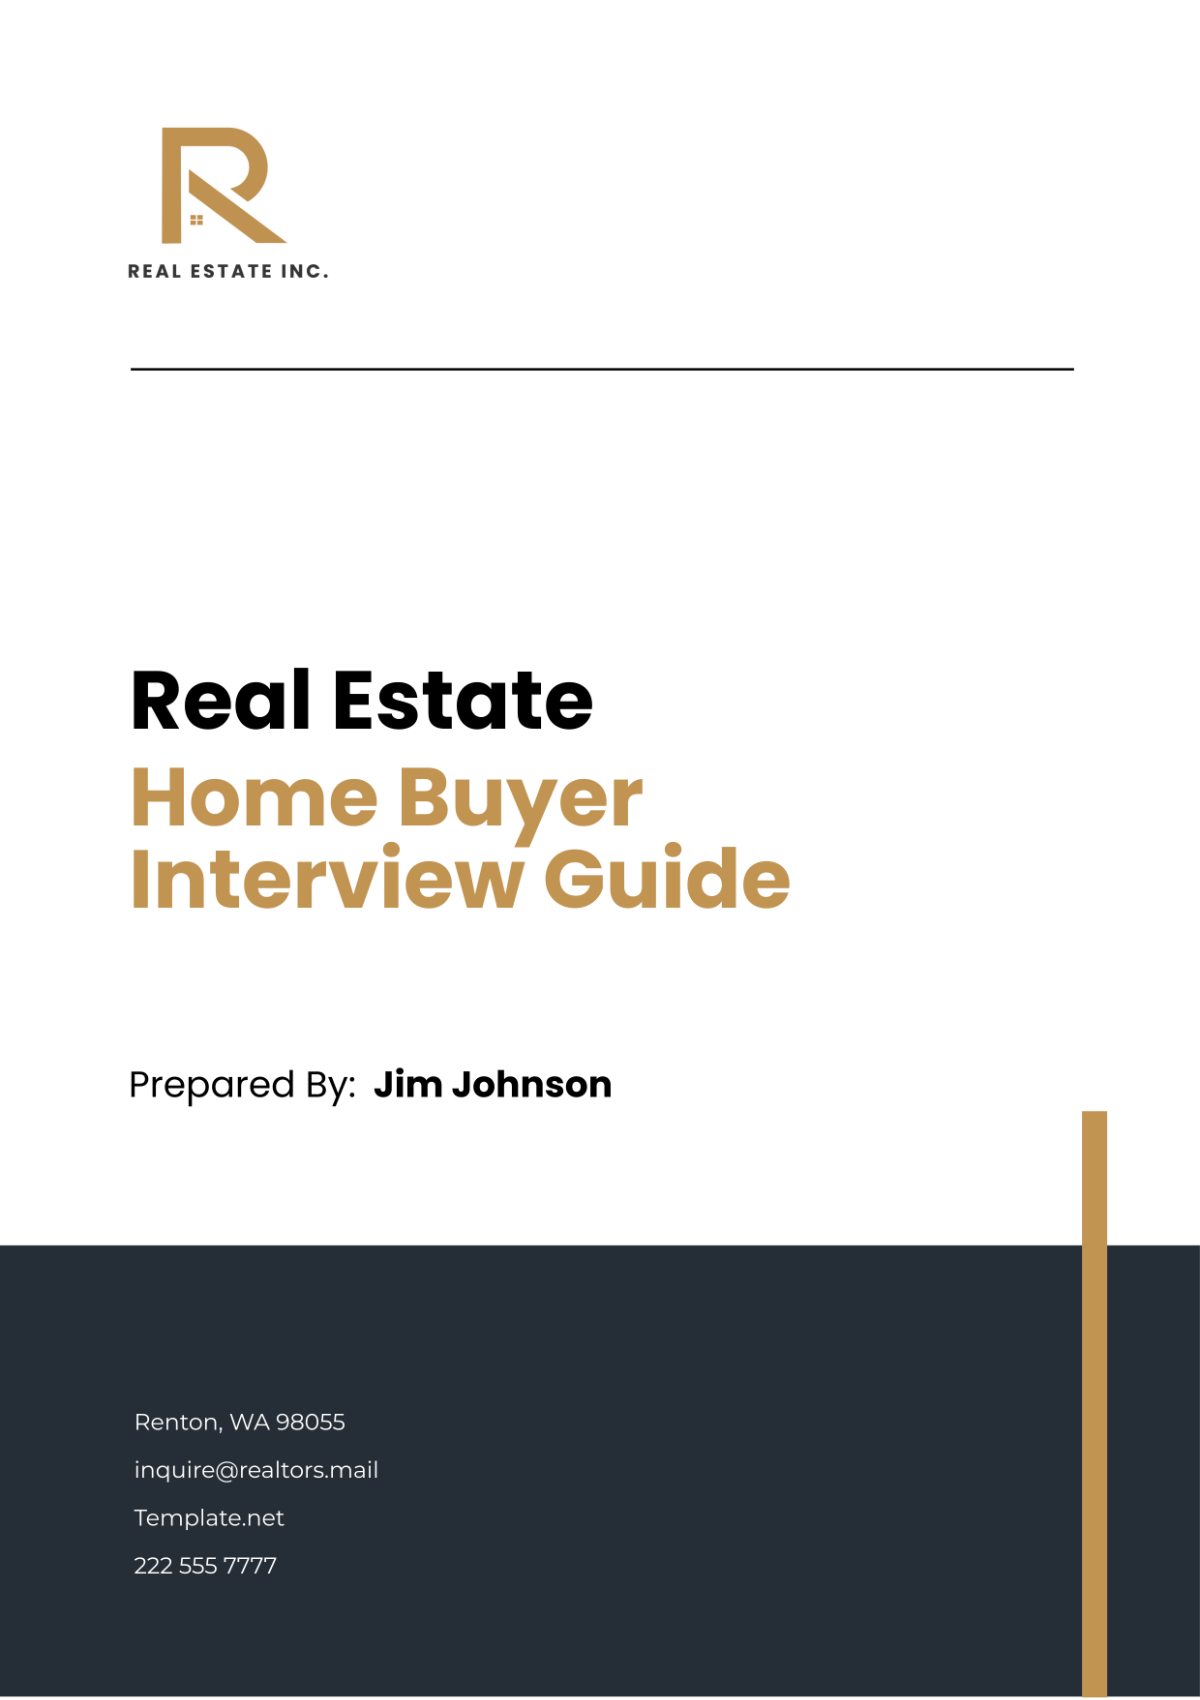 Real Estate Home Buyer Interview Guide Template